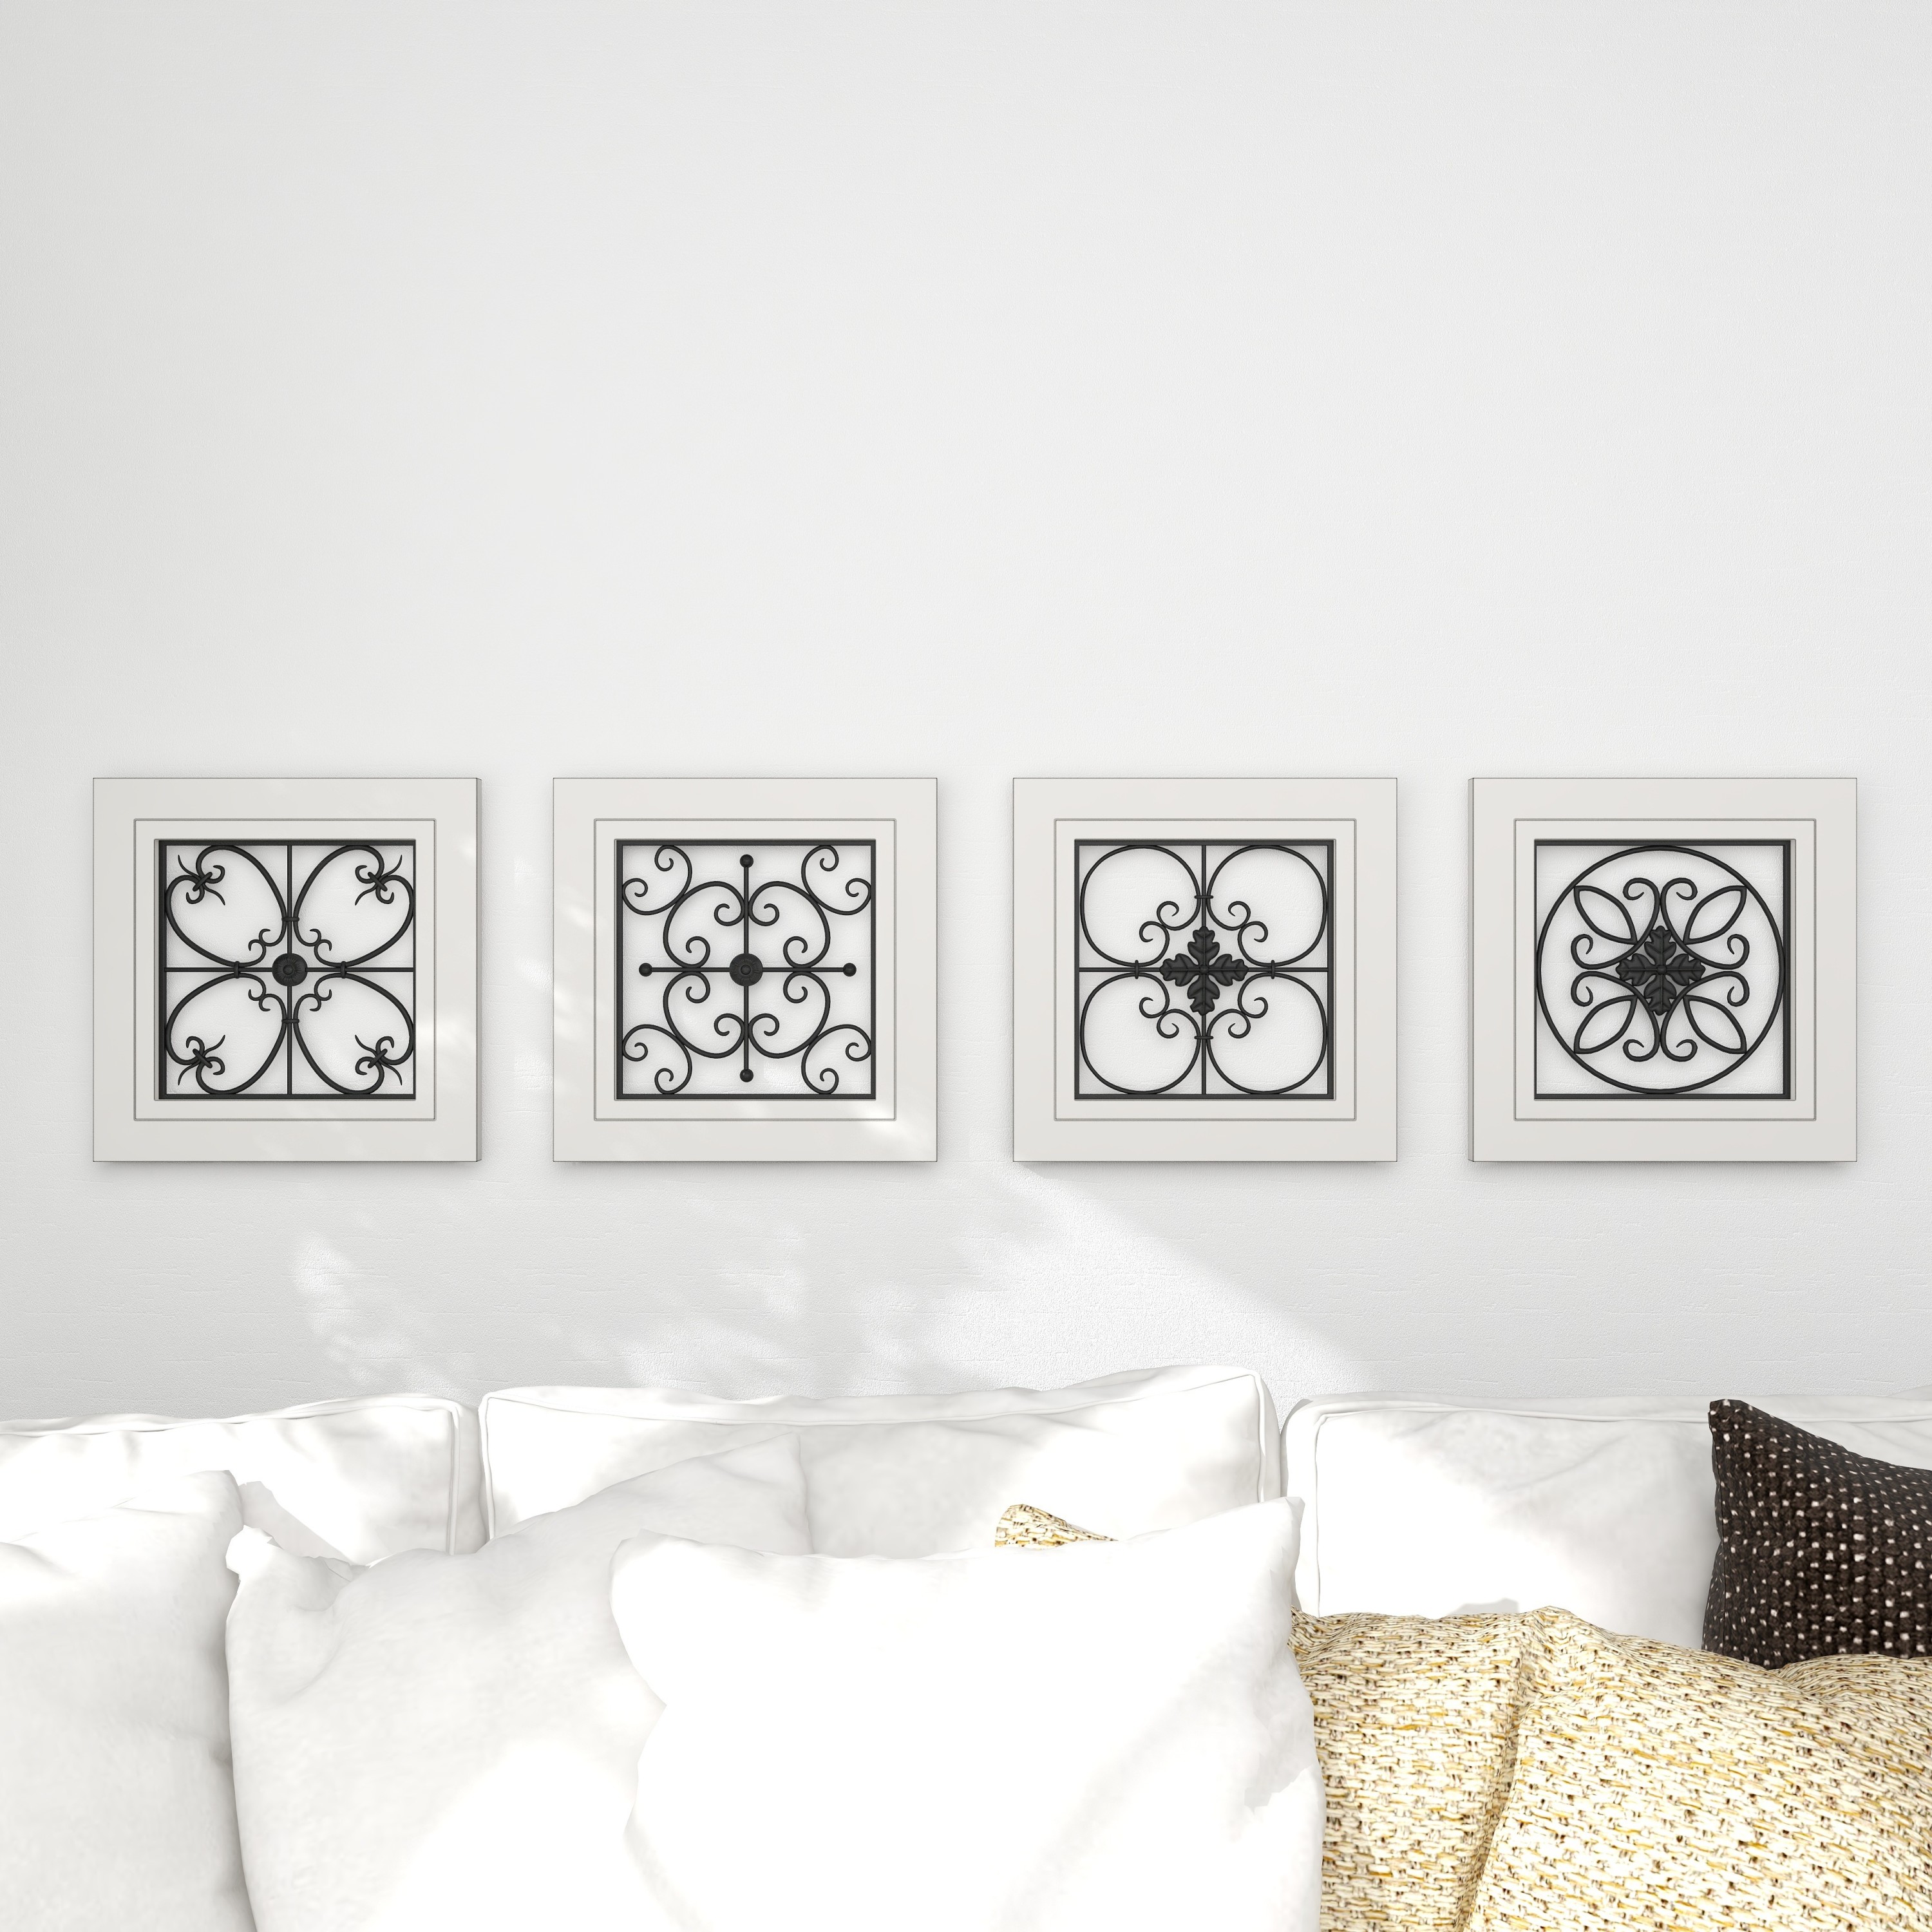 DecMode White Wood Scroll Wall Decor with Metal Relief (4 Count) - image 13 of 15